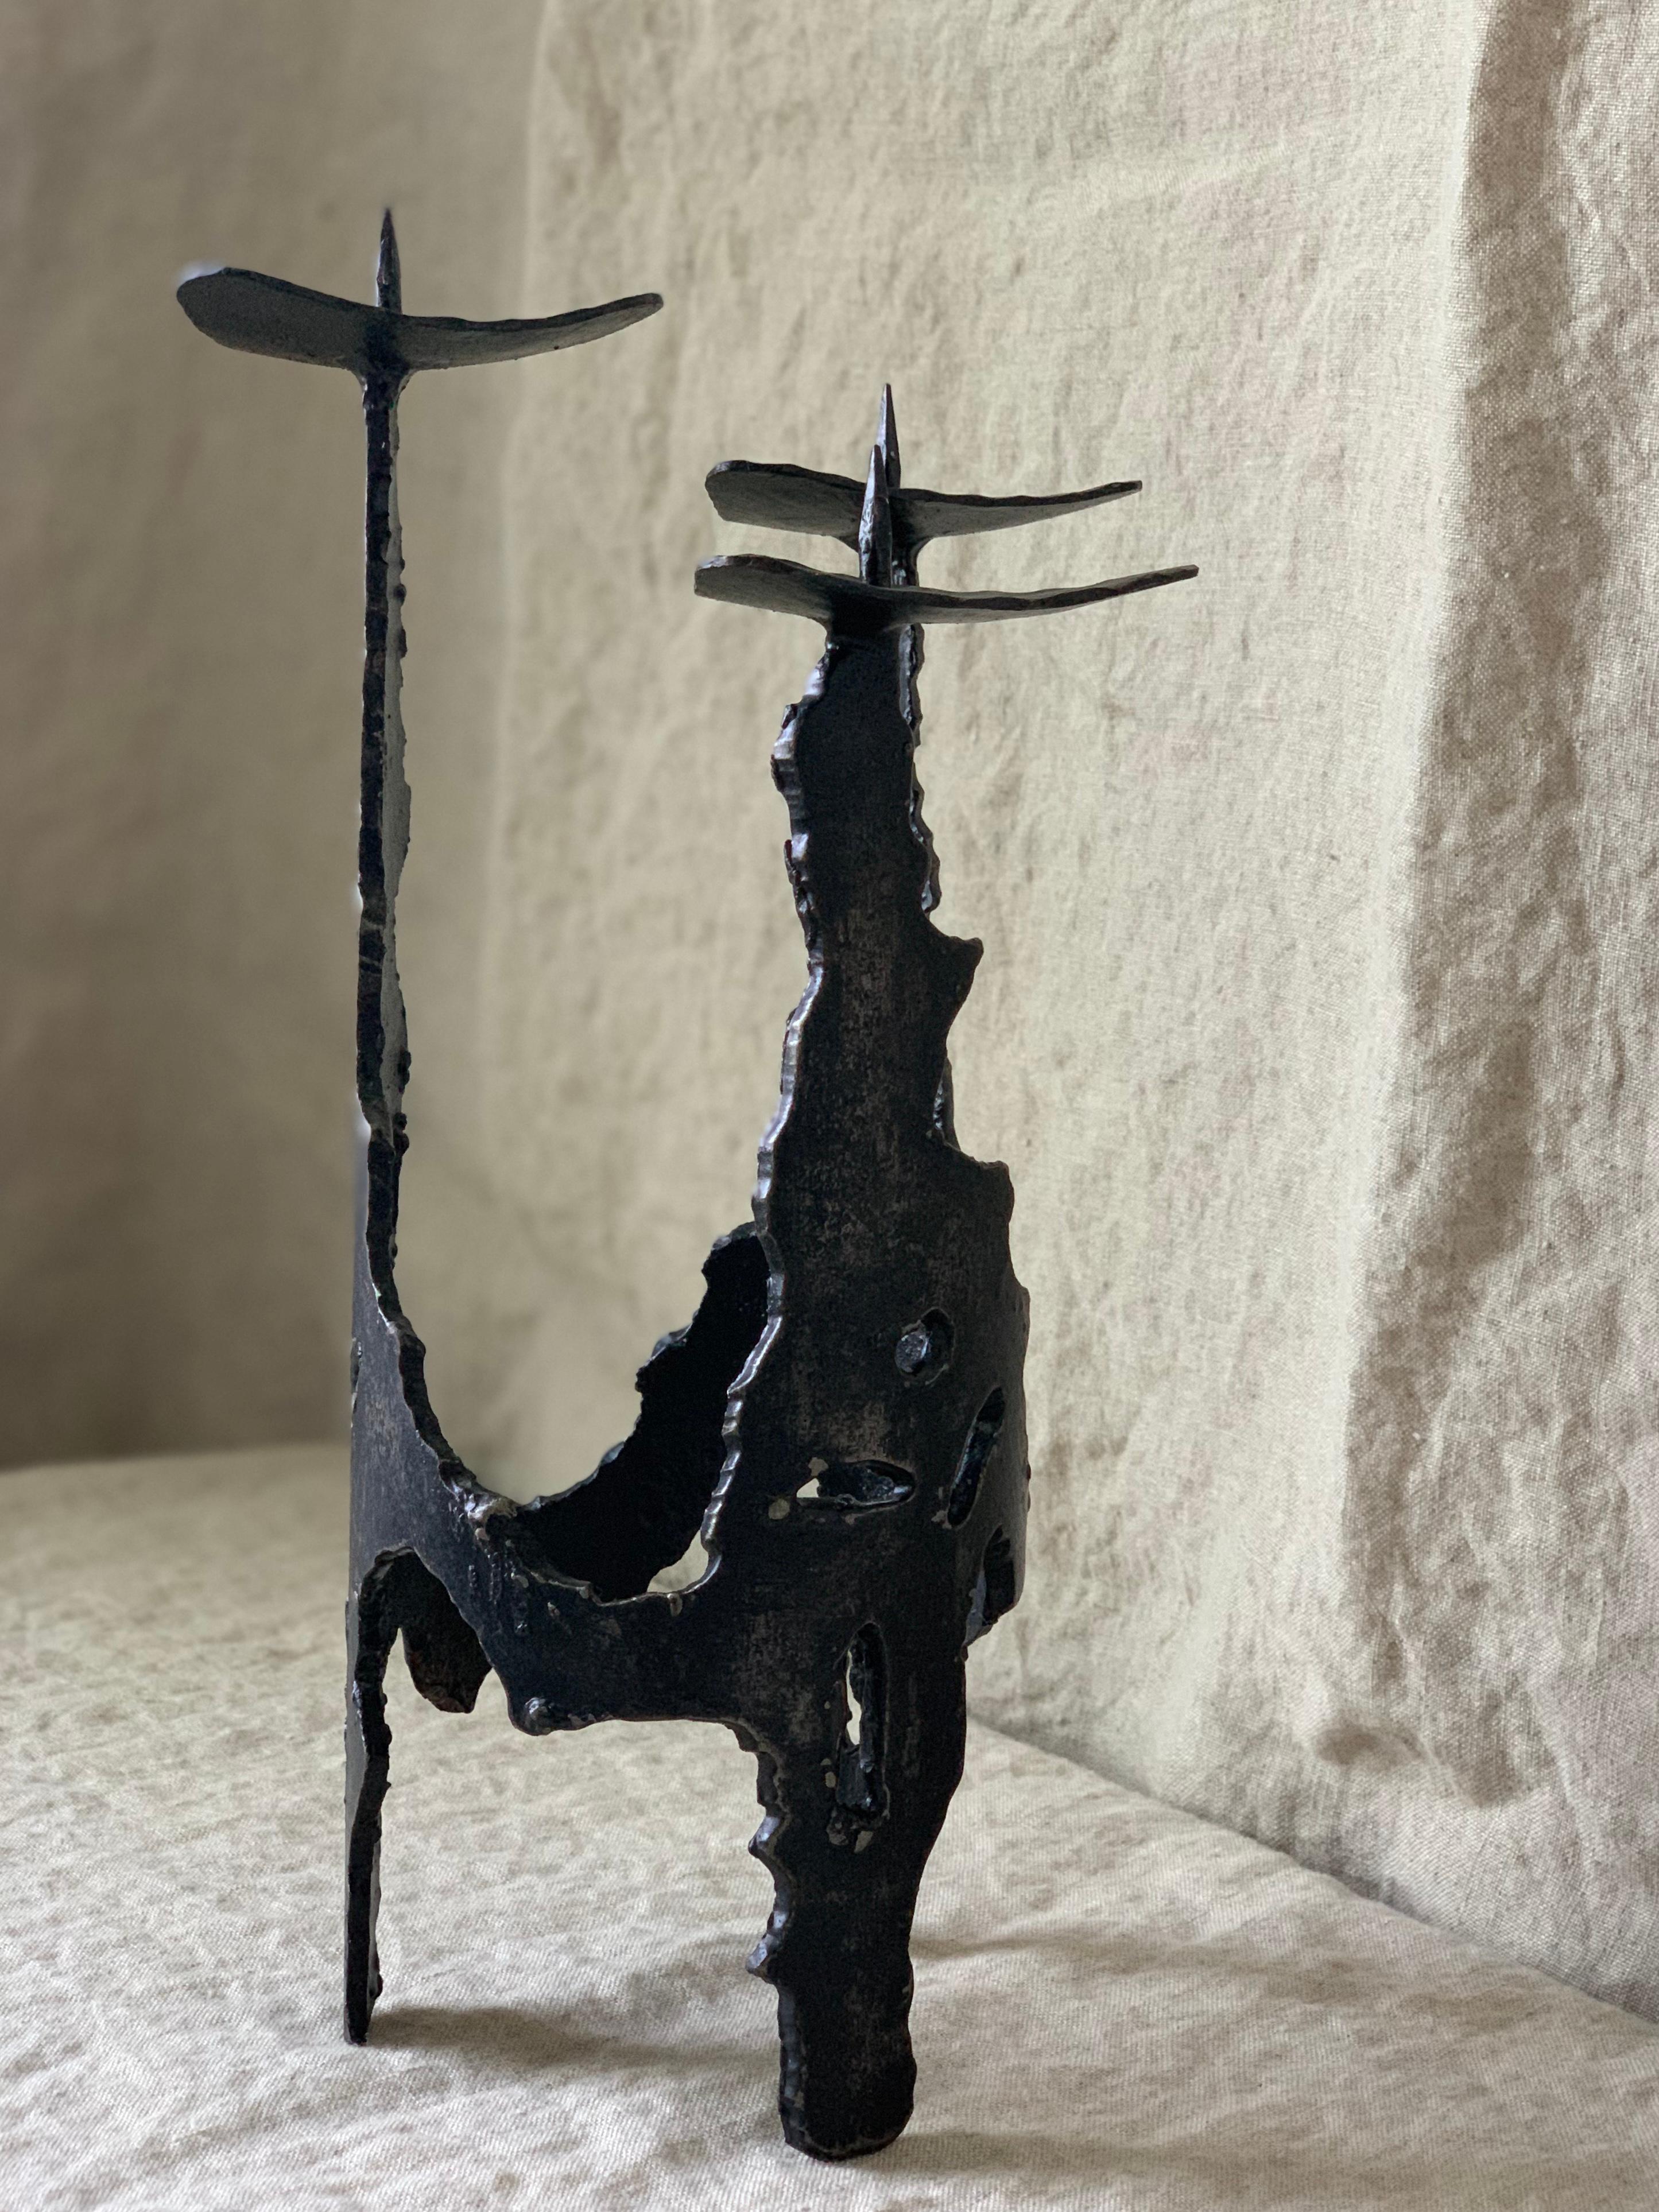 Wrought iron brutalist candle holder, handmade in former GDR . Tripod structure is carved in distinct brutalist aesthetic; roughly carved motifs. Candle rests are designed in a triangular fashion, resembling a flower petal. Highest point measures